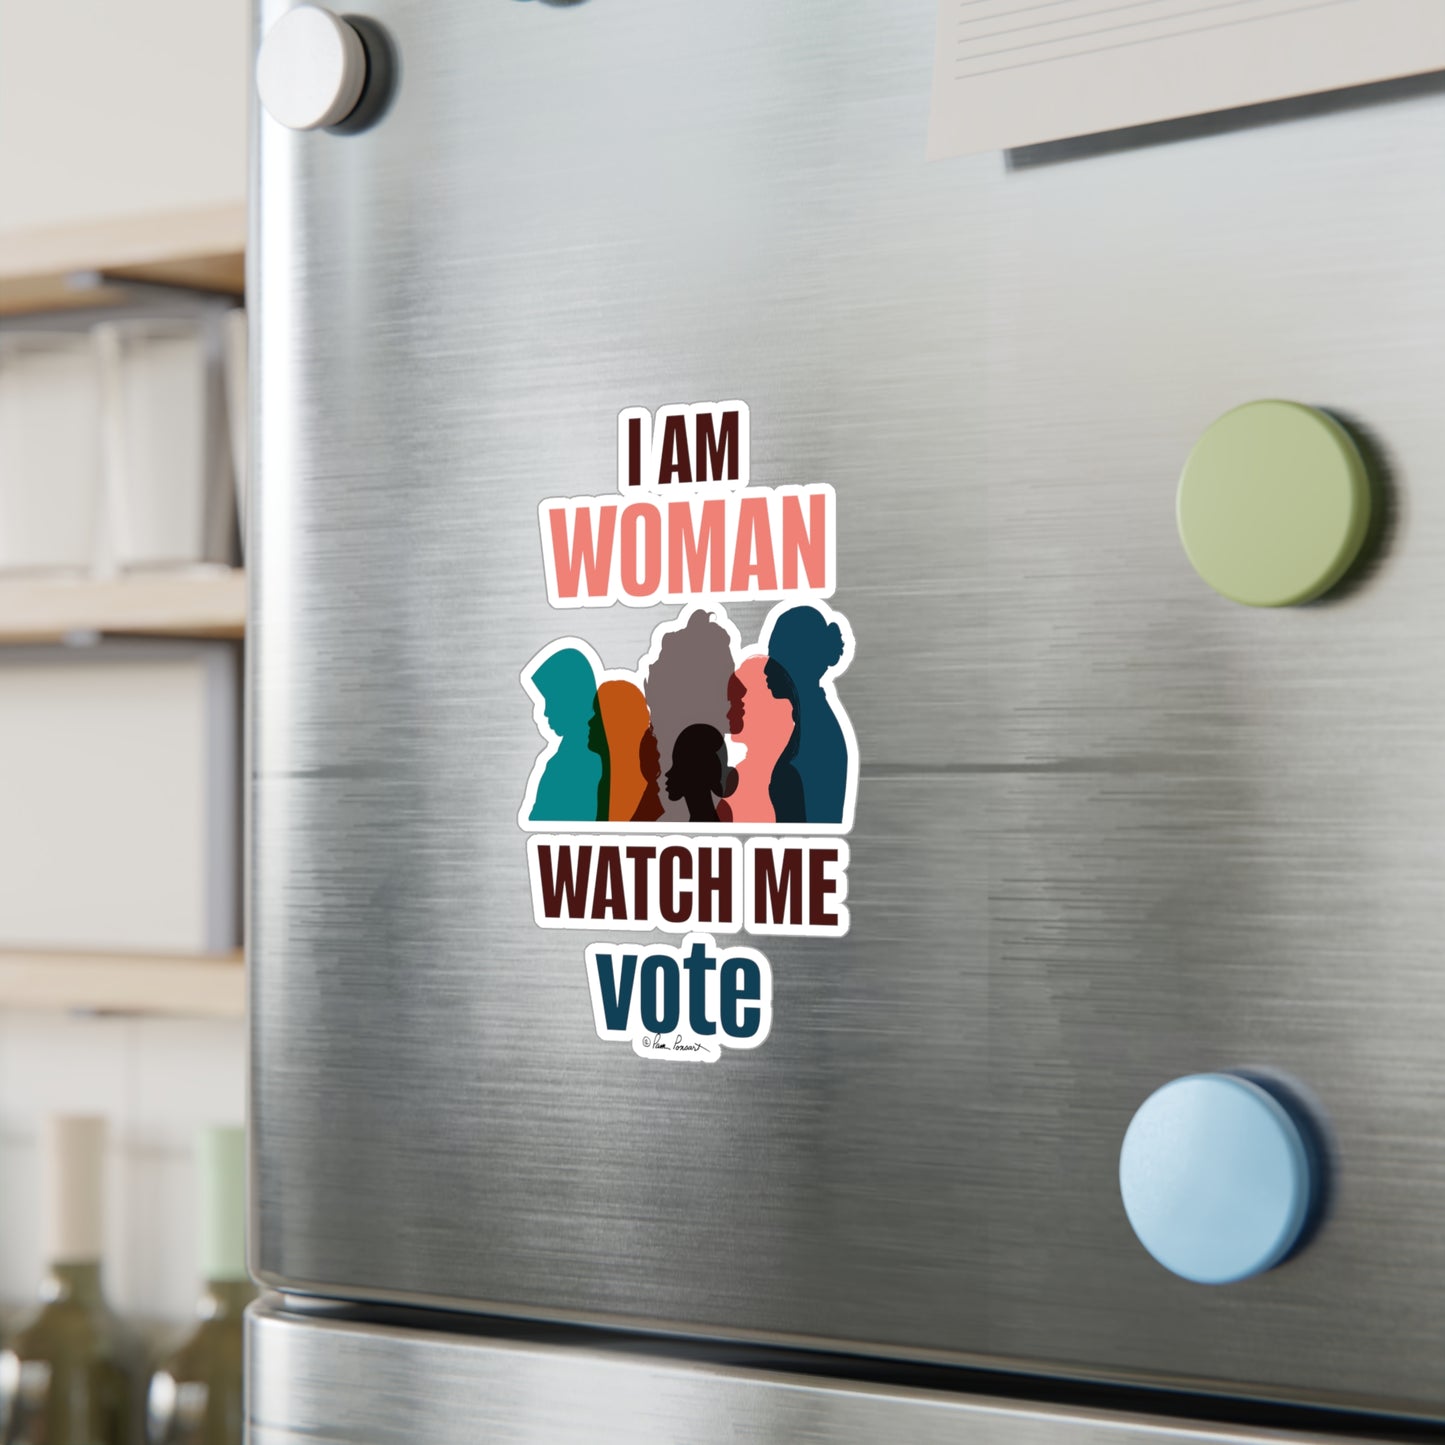 A refrigerator door adorned with a removable adhesive sticker reading "i am woman watch me vote" featuring silhouettes of diverse women from Printify's Voting Women's Decals.